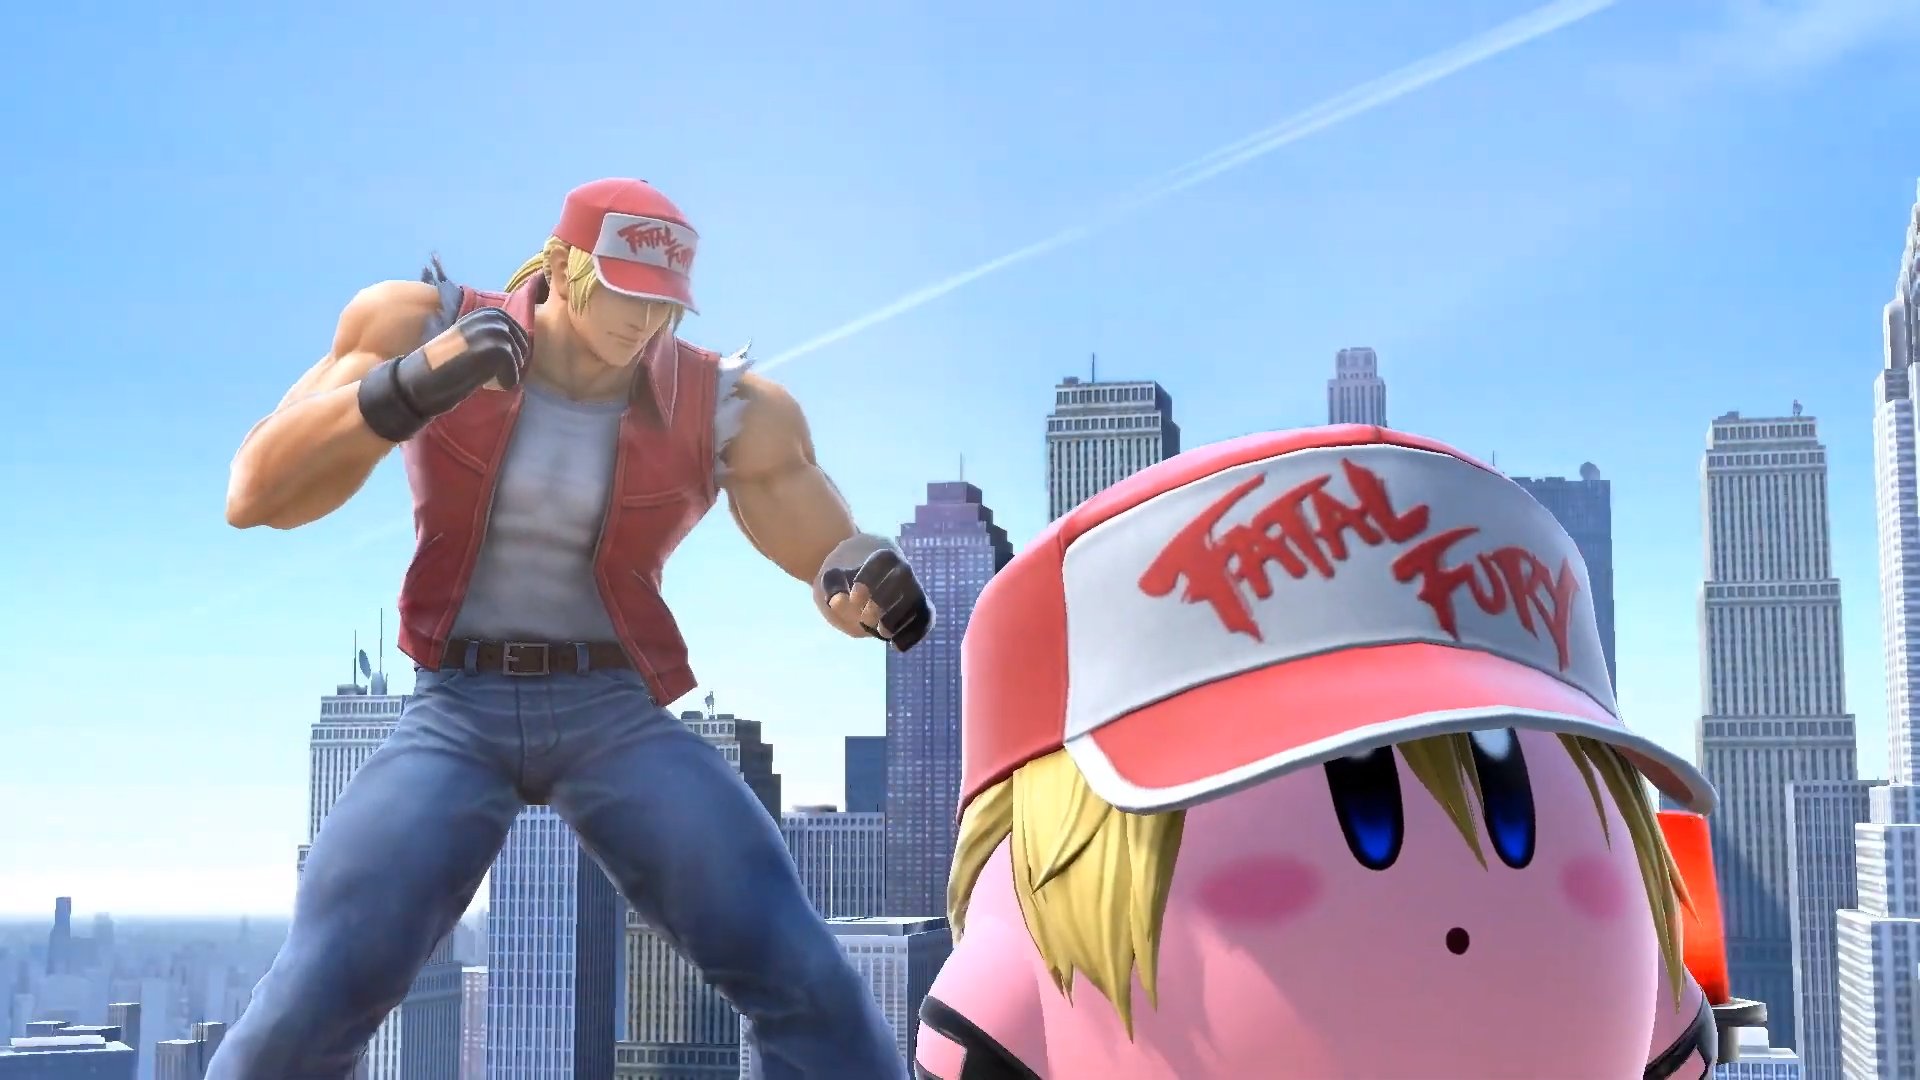 Terry Bogard Now Available in Super Smash Bros. Ultimate